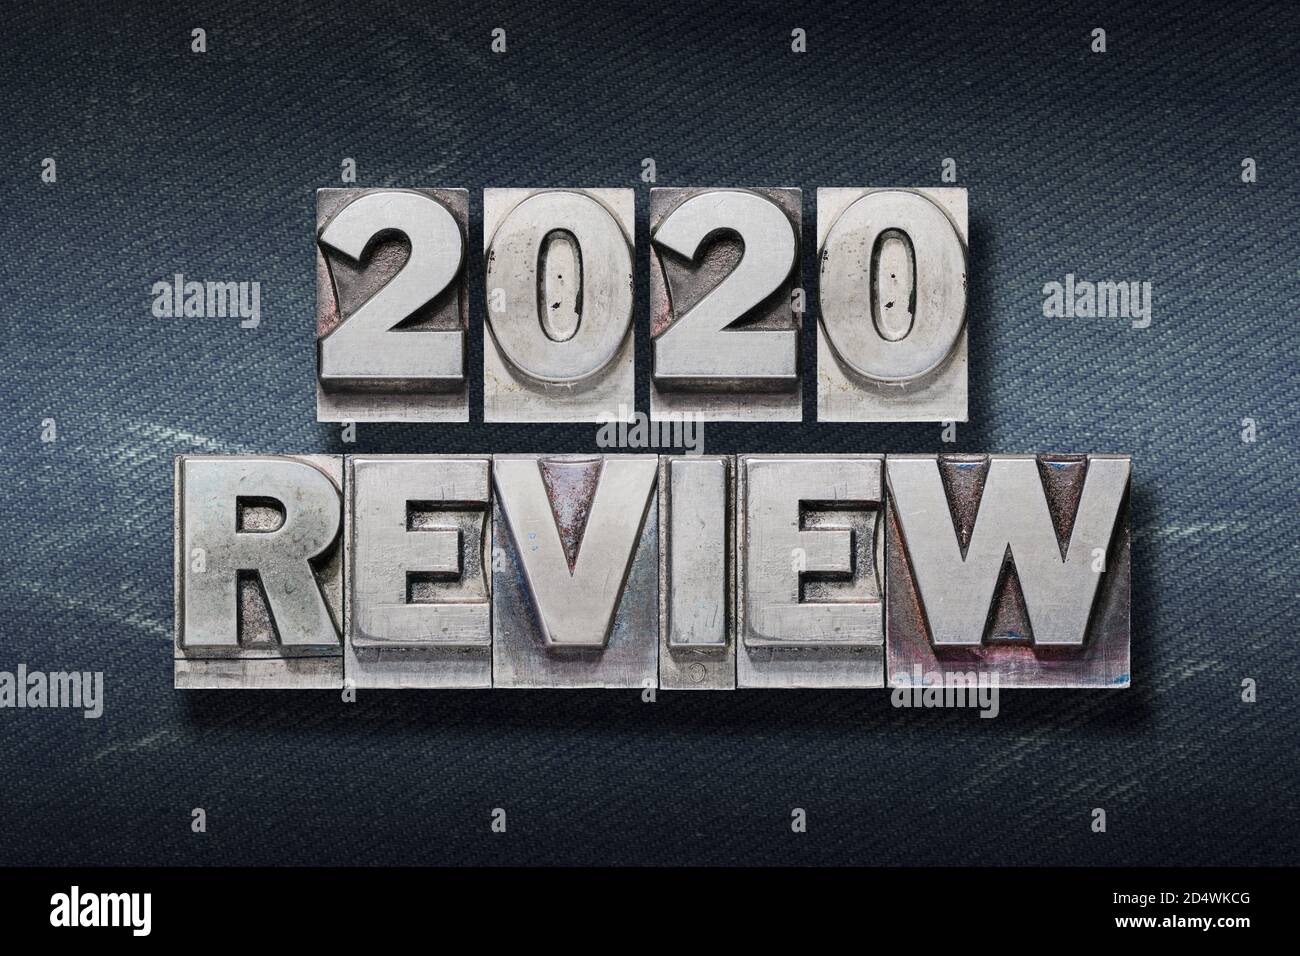 review 2020 phrase made from metallic letterpress on dark jeans background Stock Photo